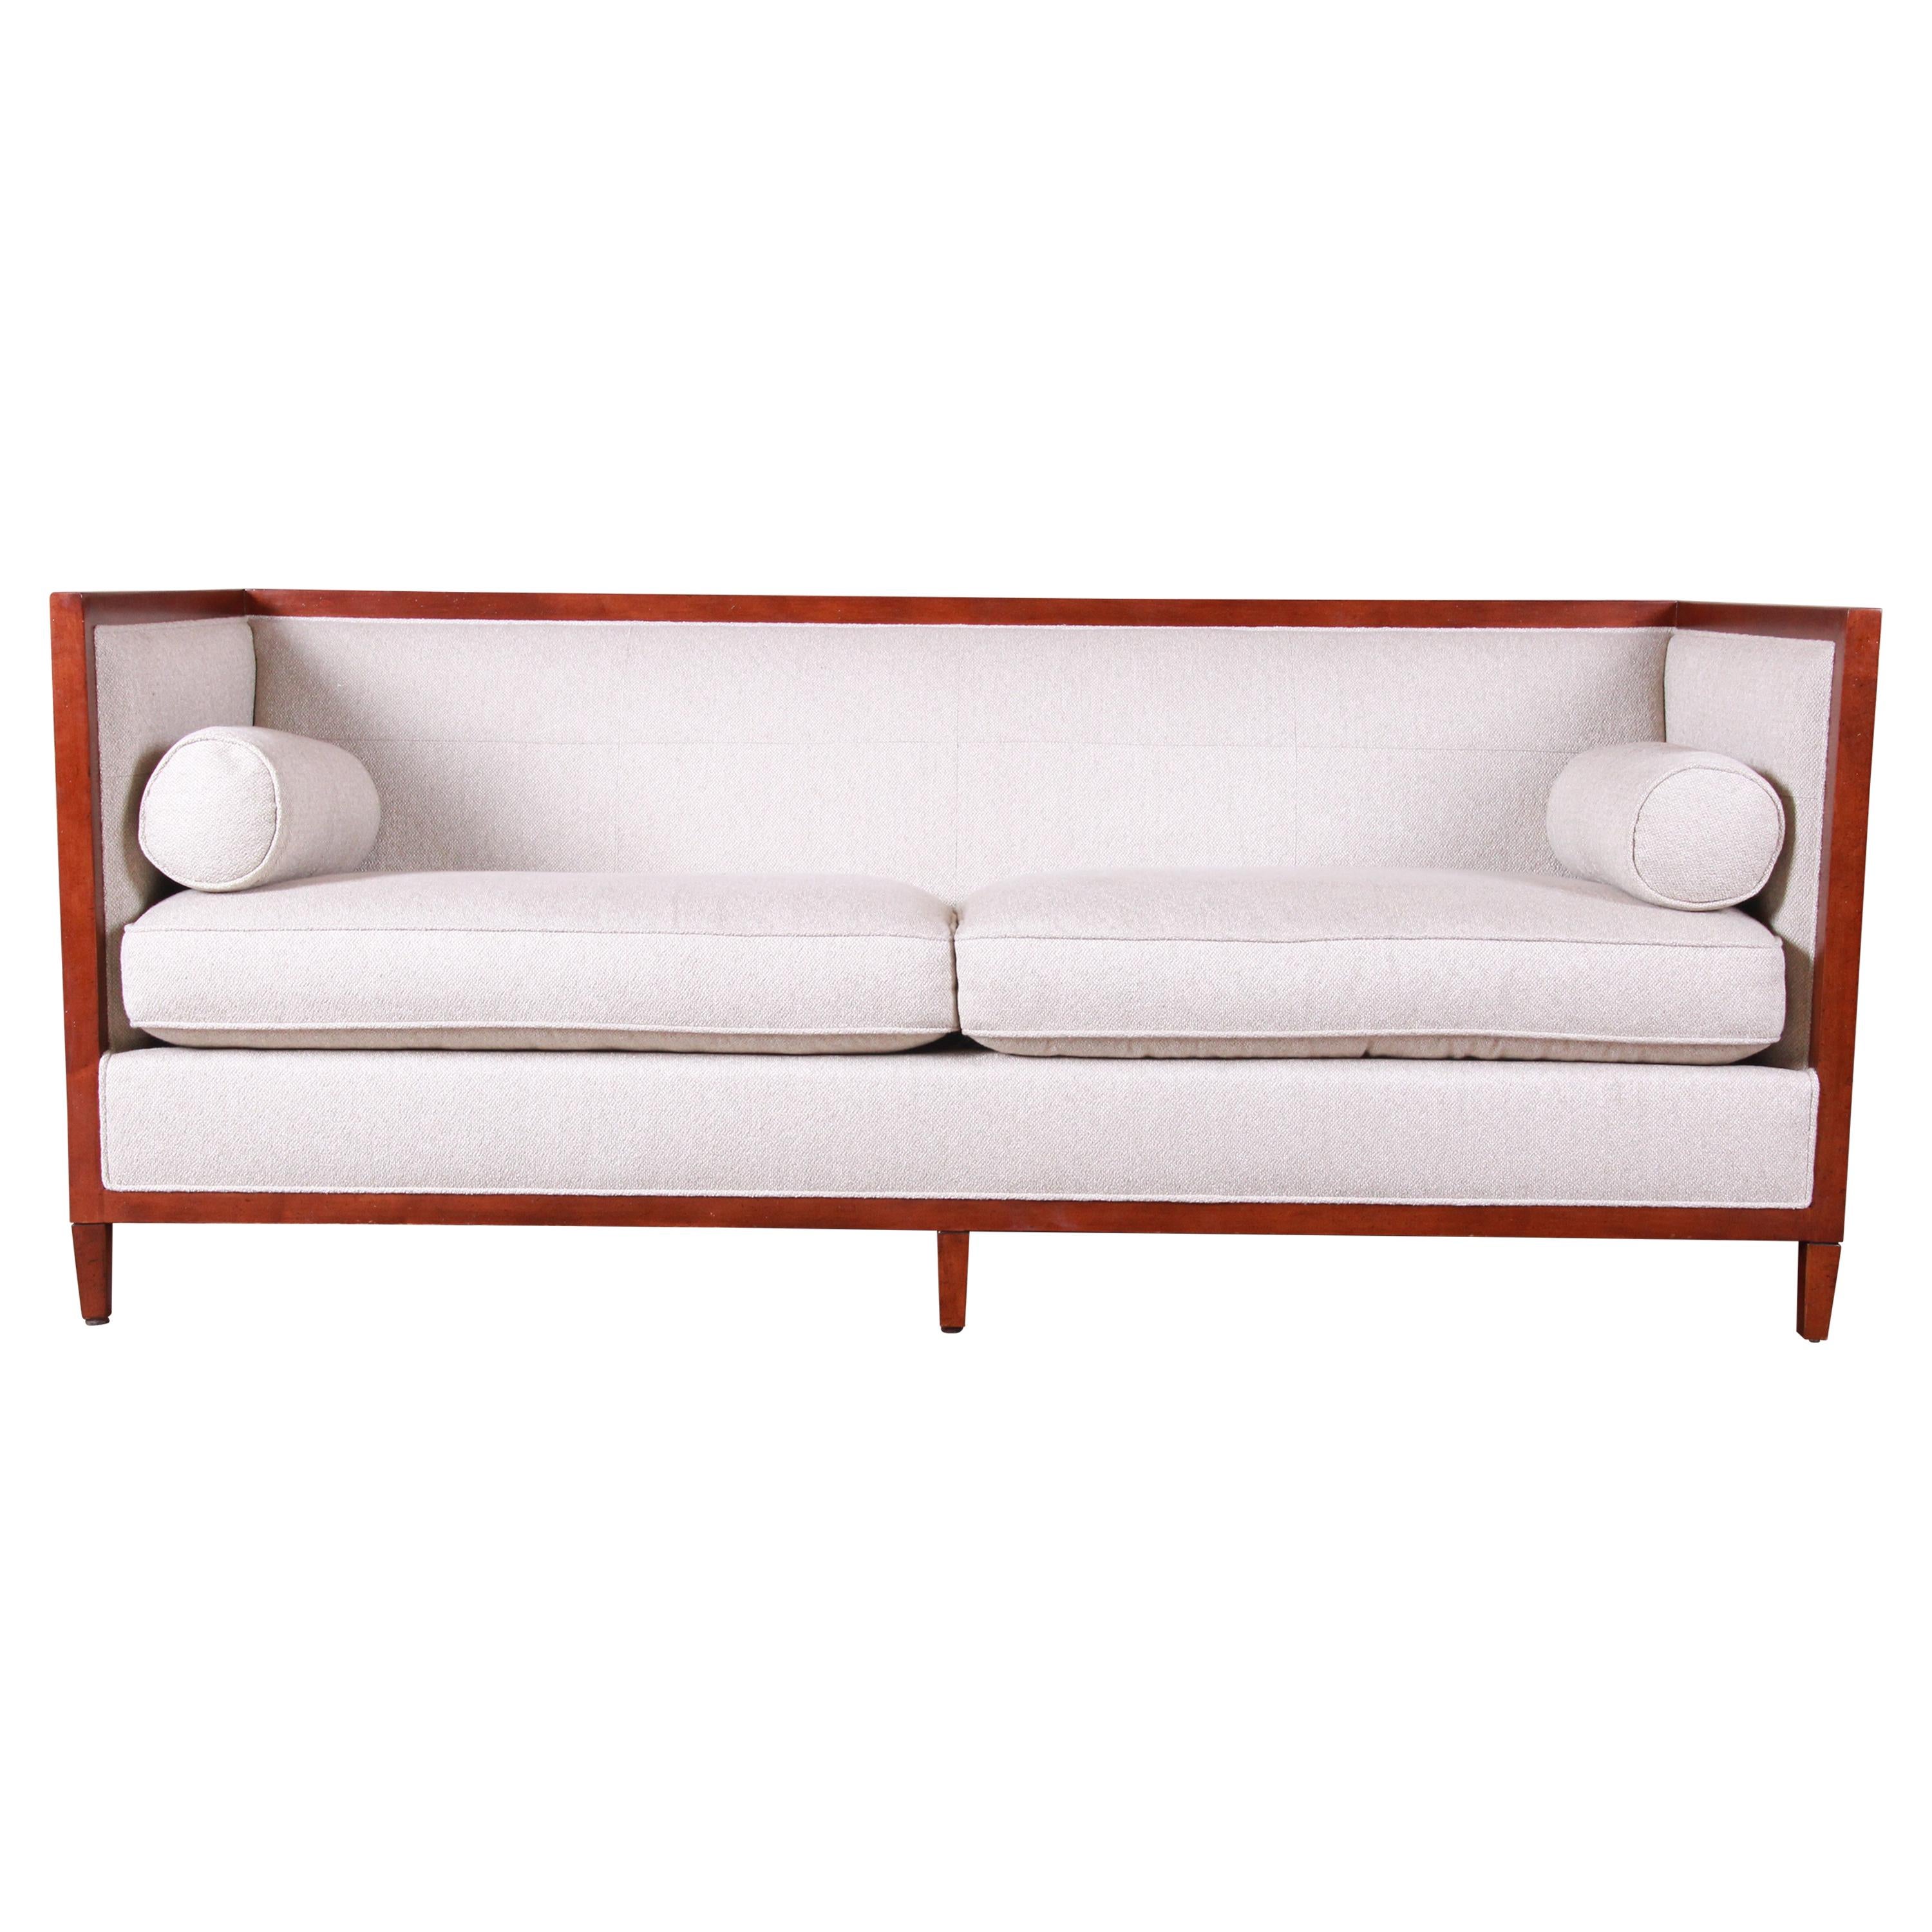 Barbara Barry for Baker Contemporary Down-Filled Sofa